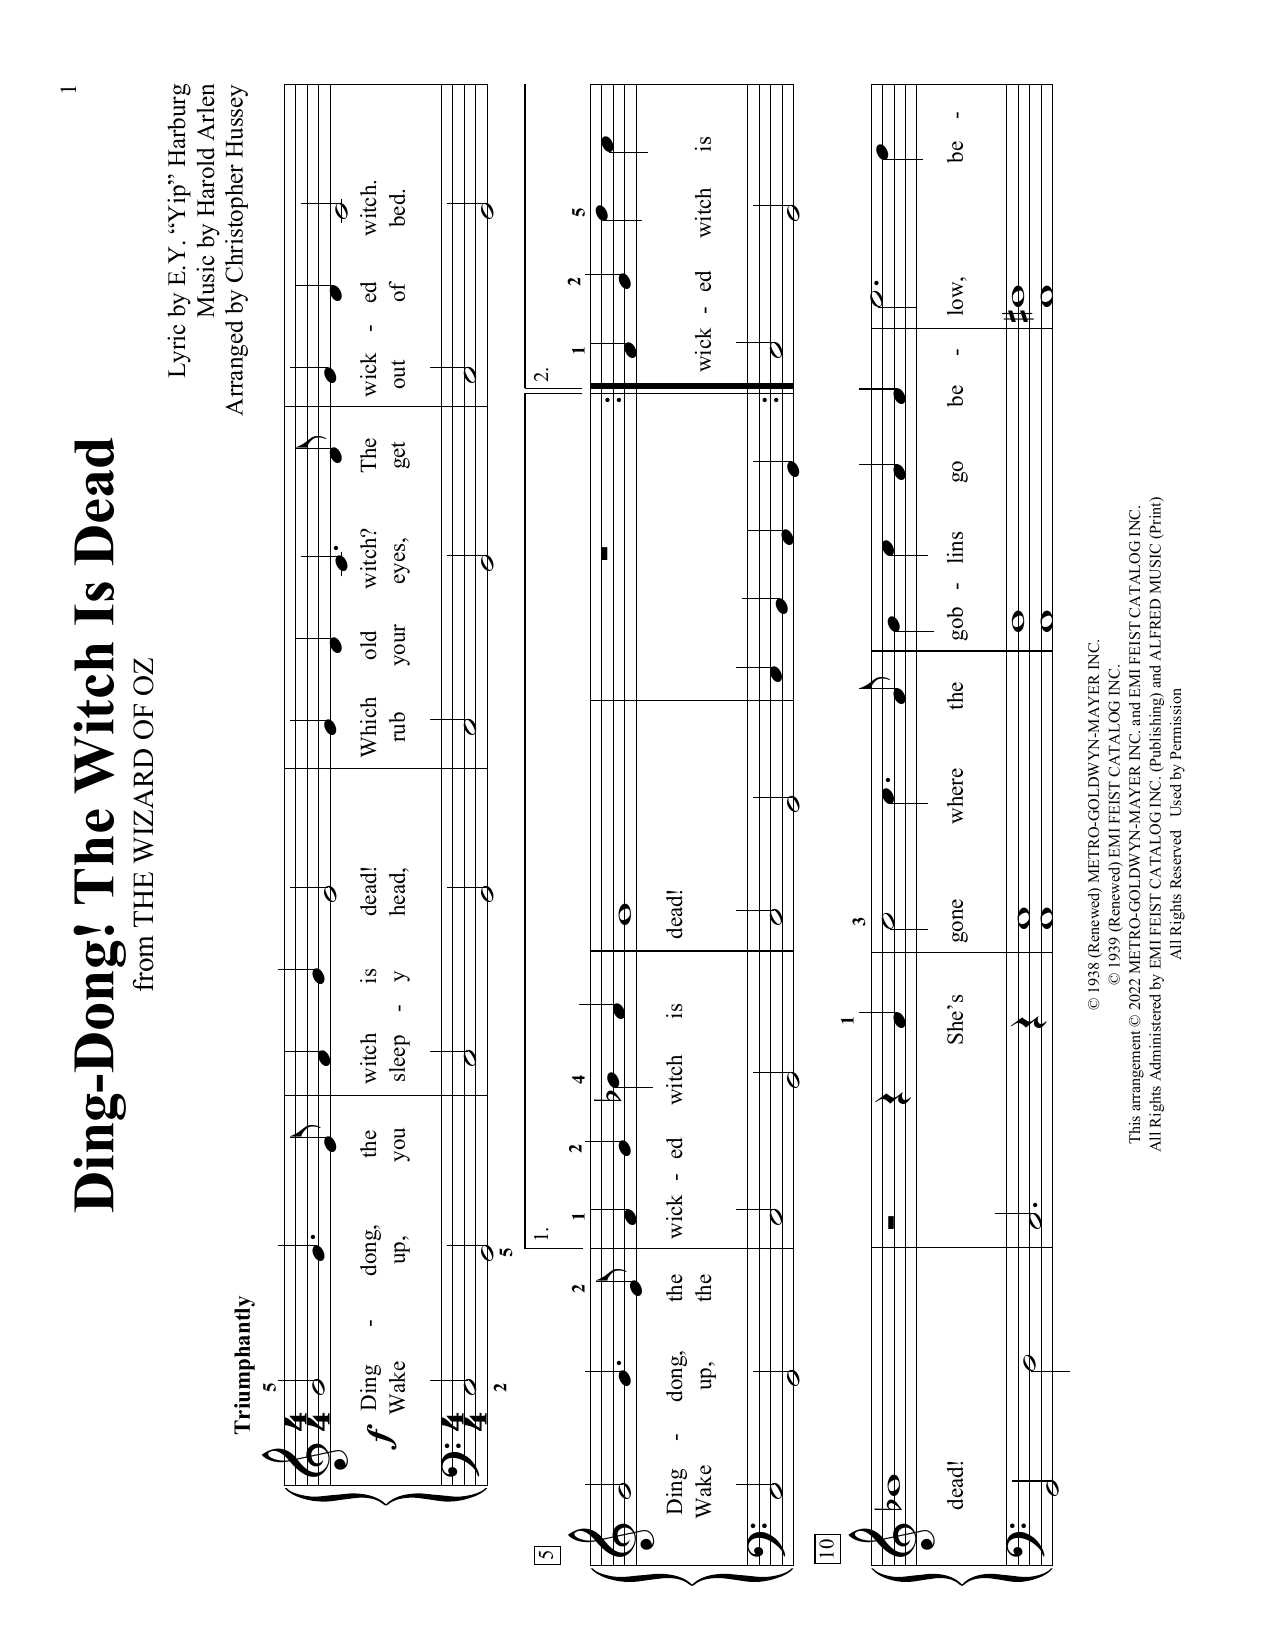 Download Harold Arlen Ding-Dong! The Witch Is Dead (from The Sheet Music